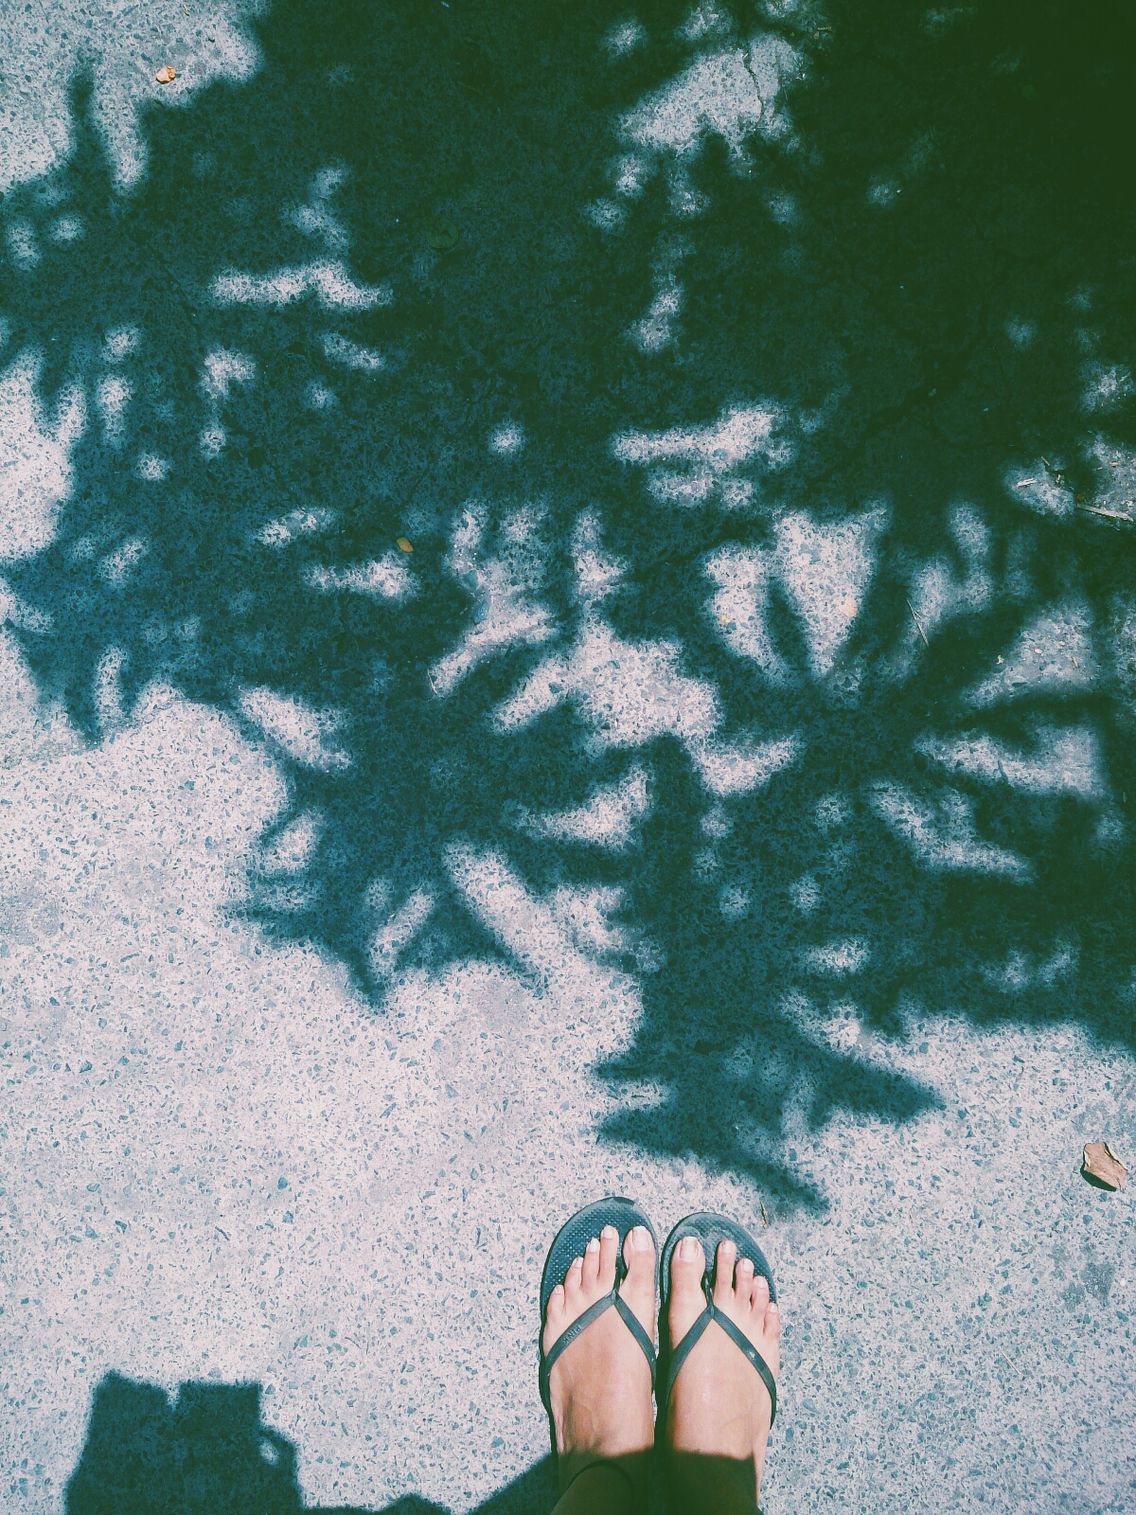 Summer Snowflakes Patterns At My Feet Vscocam Green